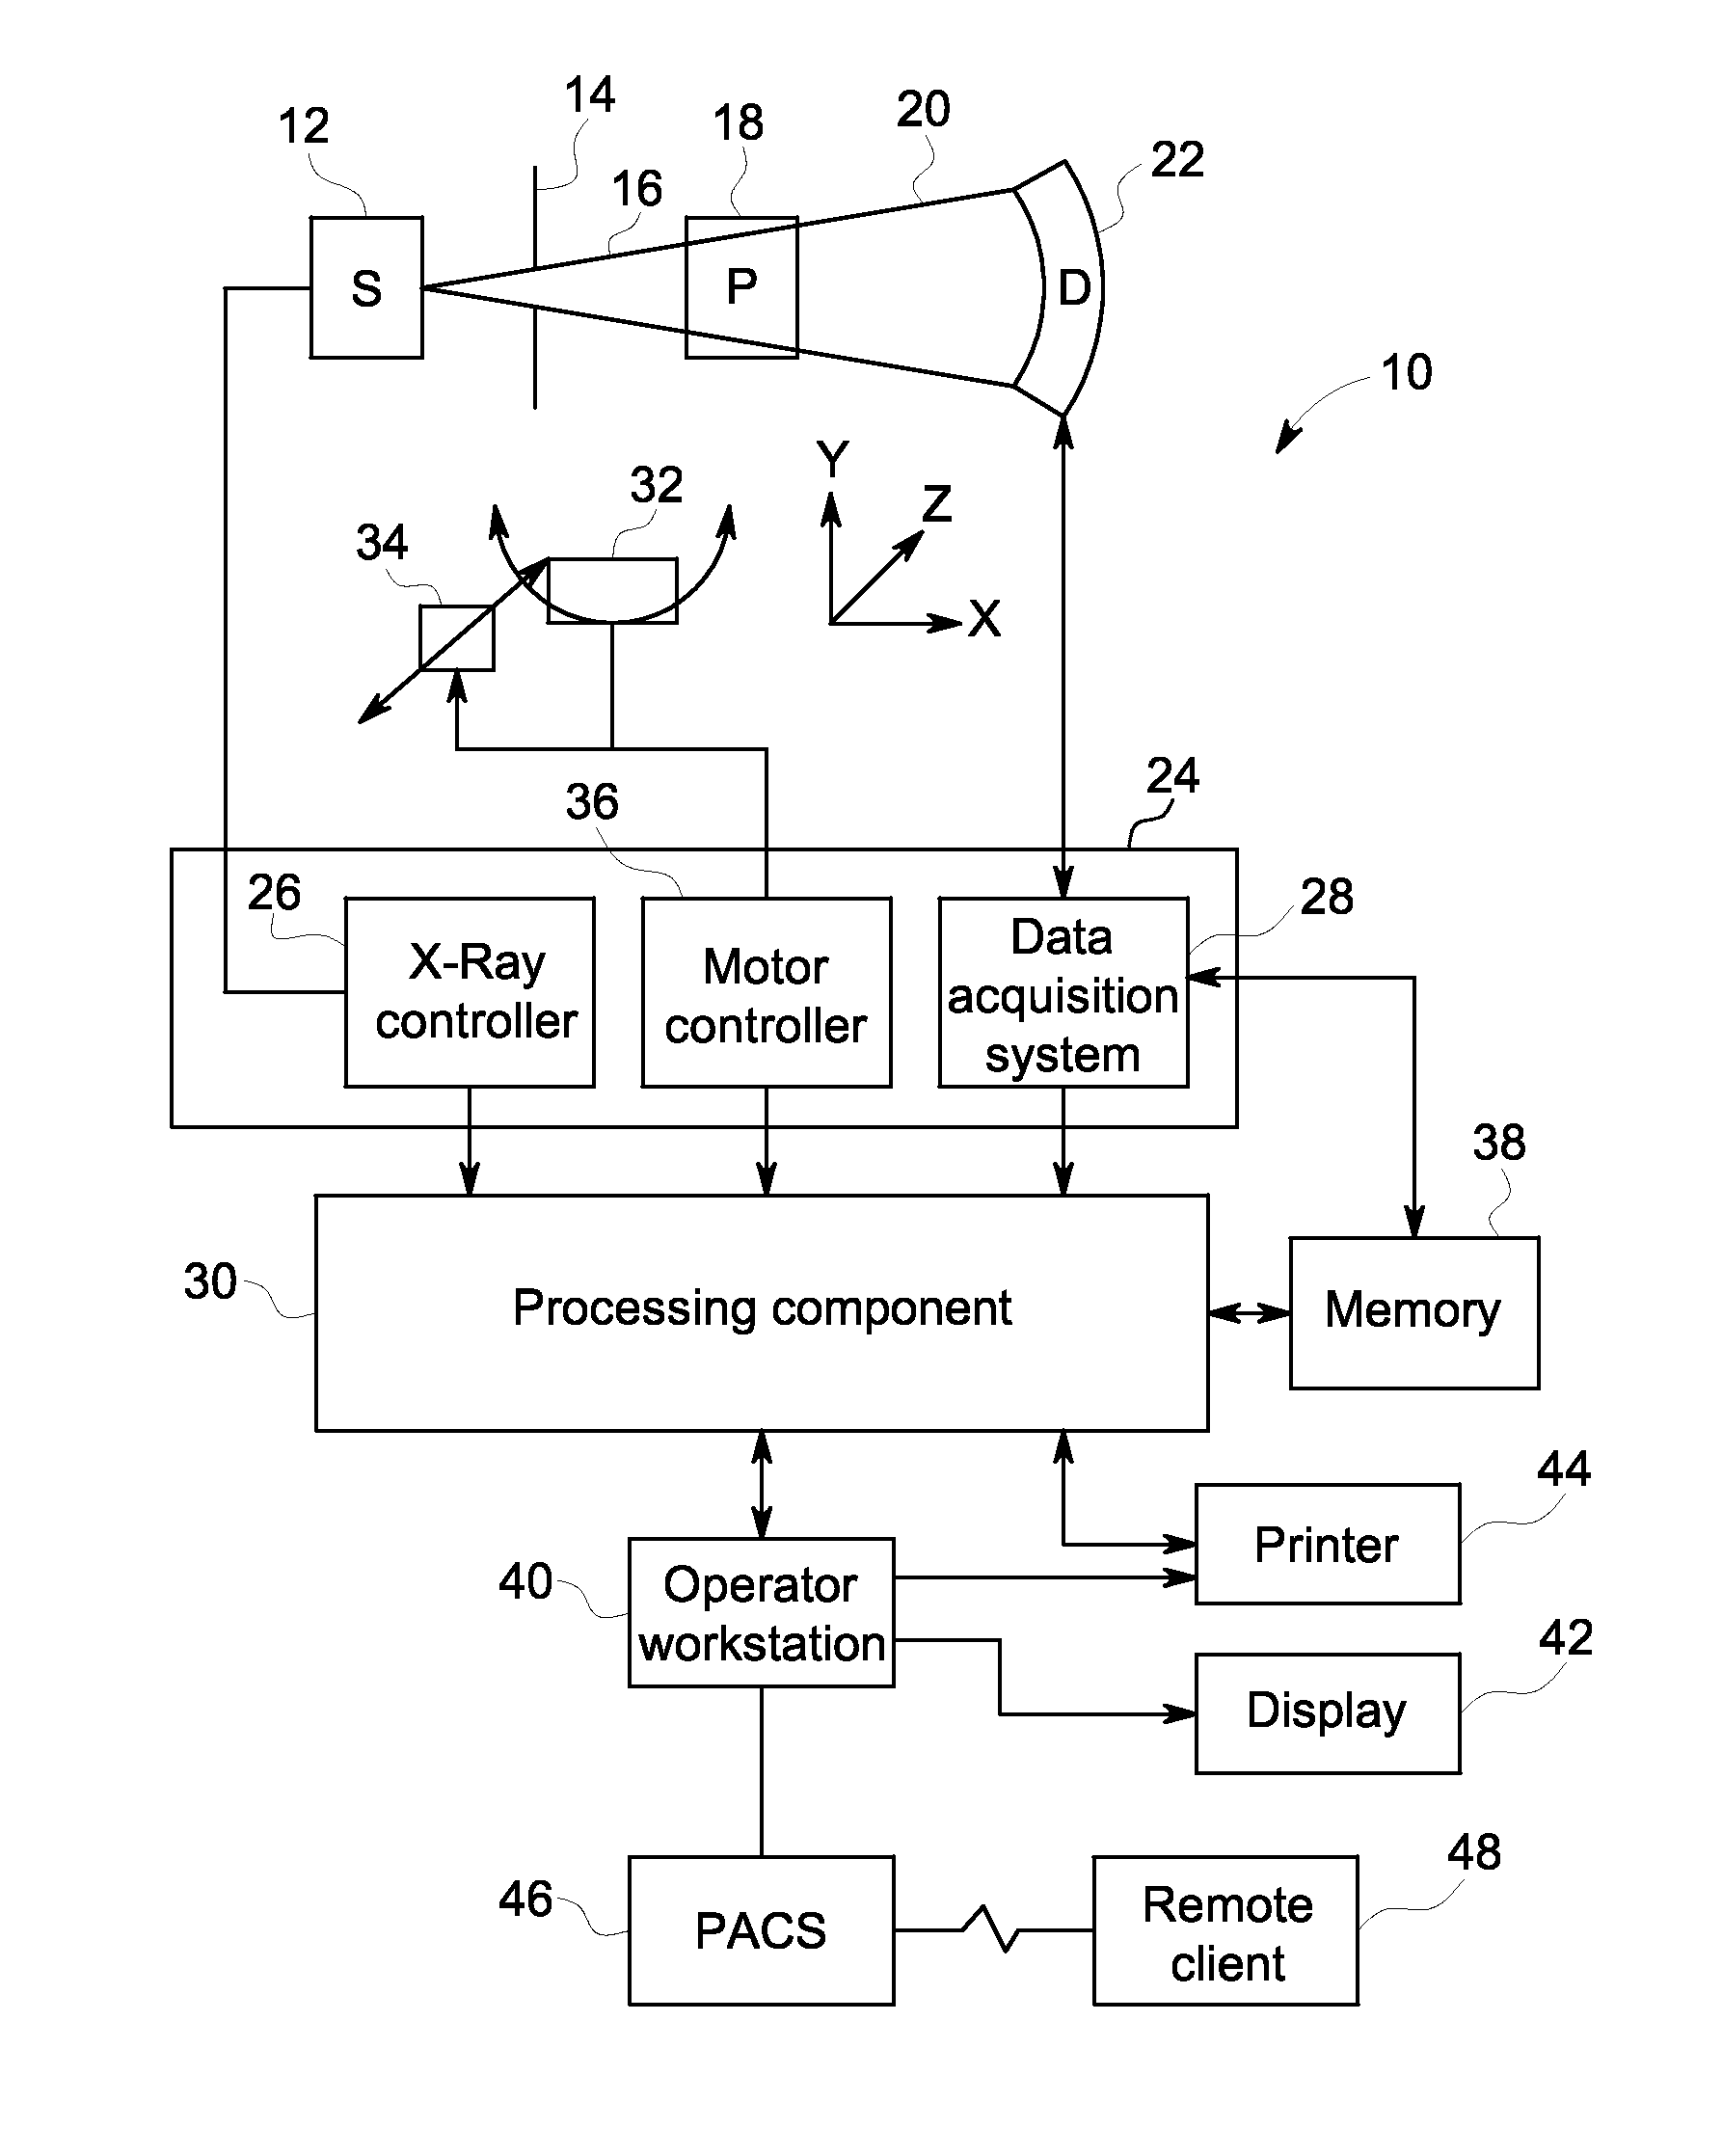 Method and system for reduced dose x-ray imaging